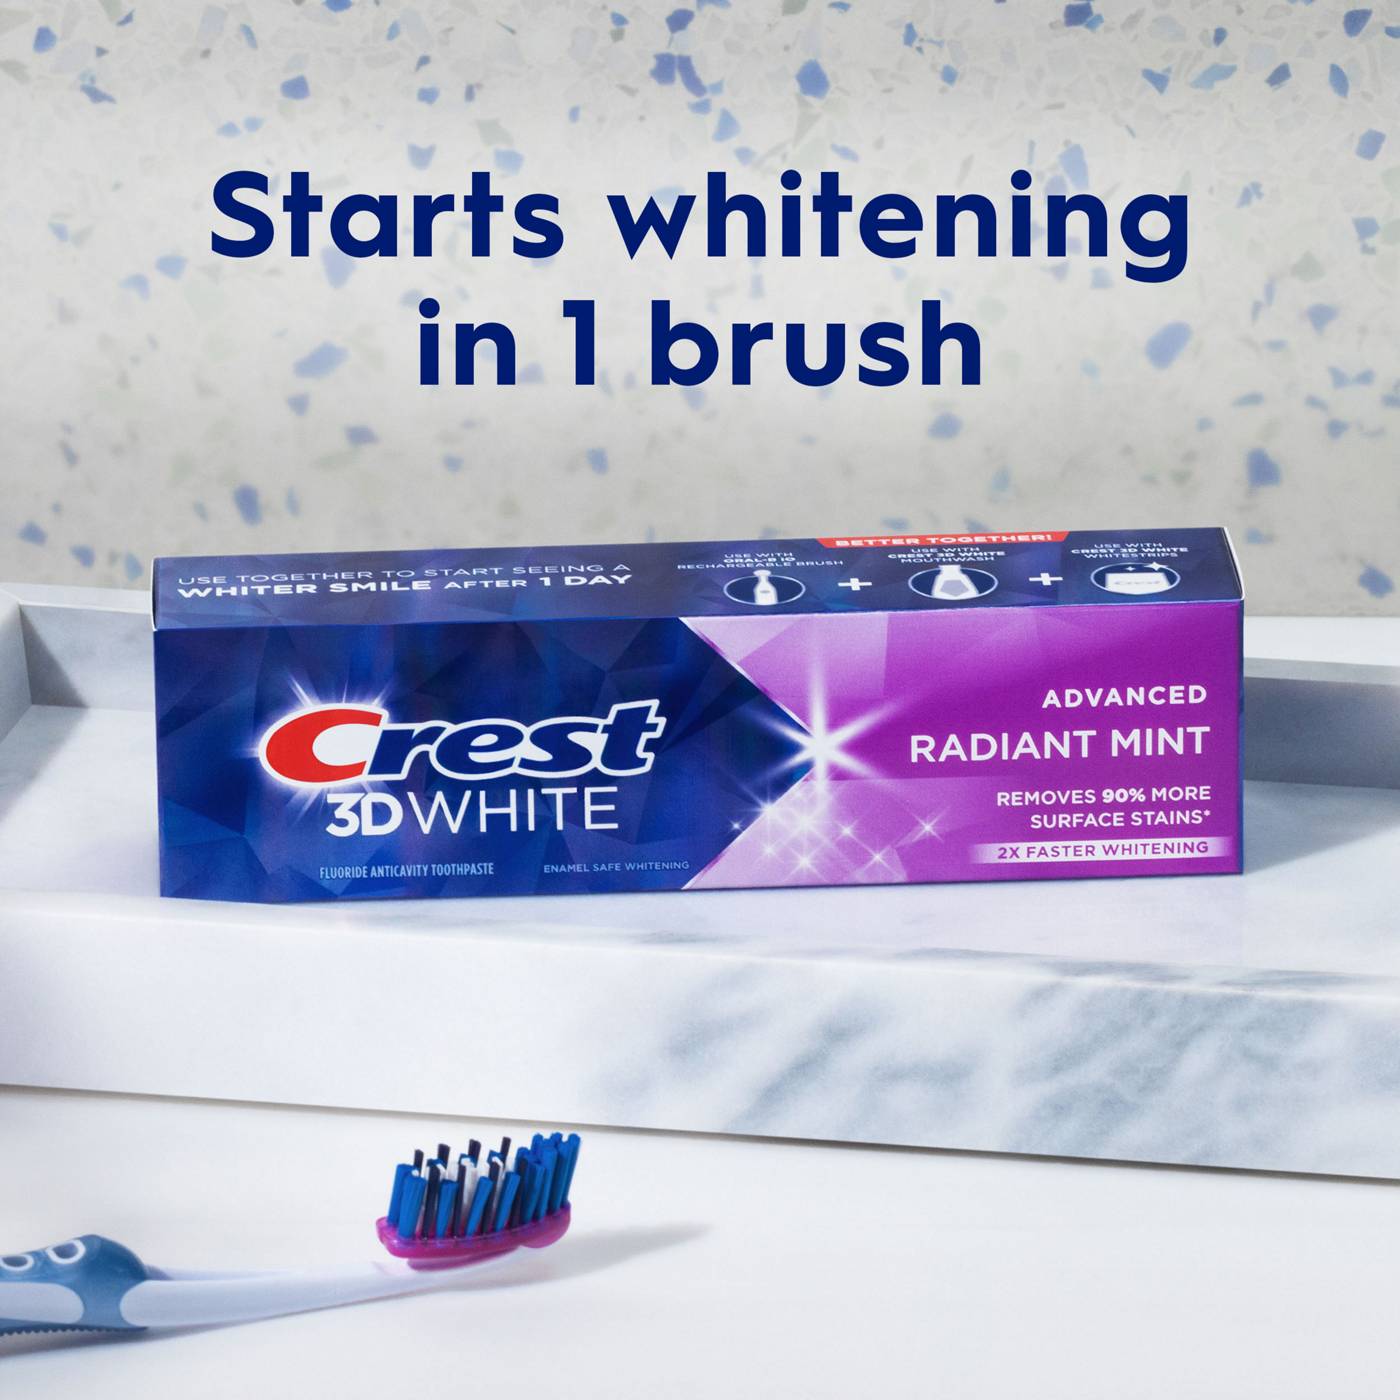 Crest 3D White Whitening Toothpaste - Radiant Mint; image 6 of 8